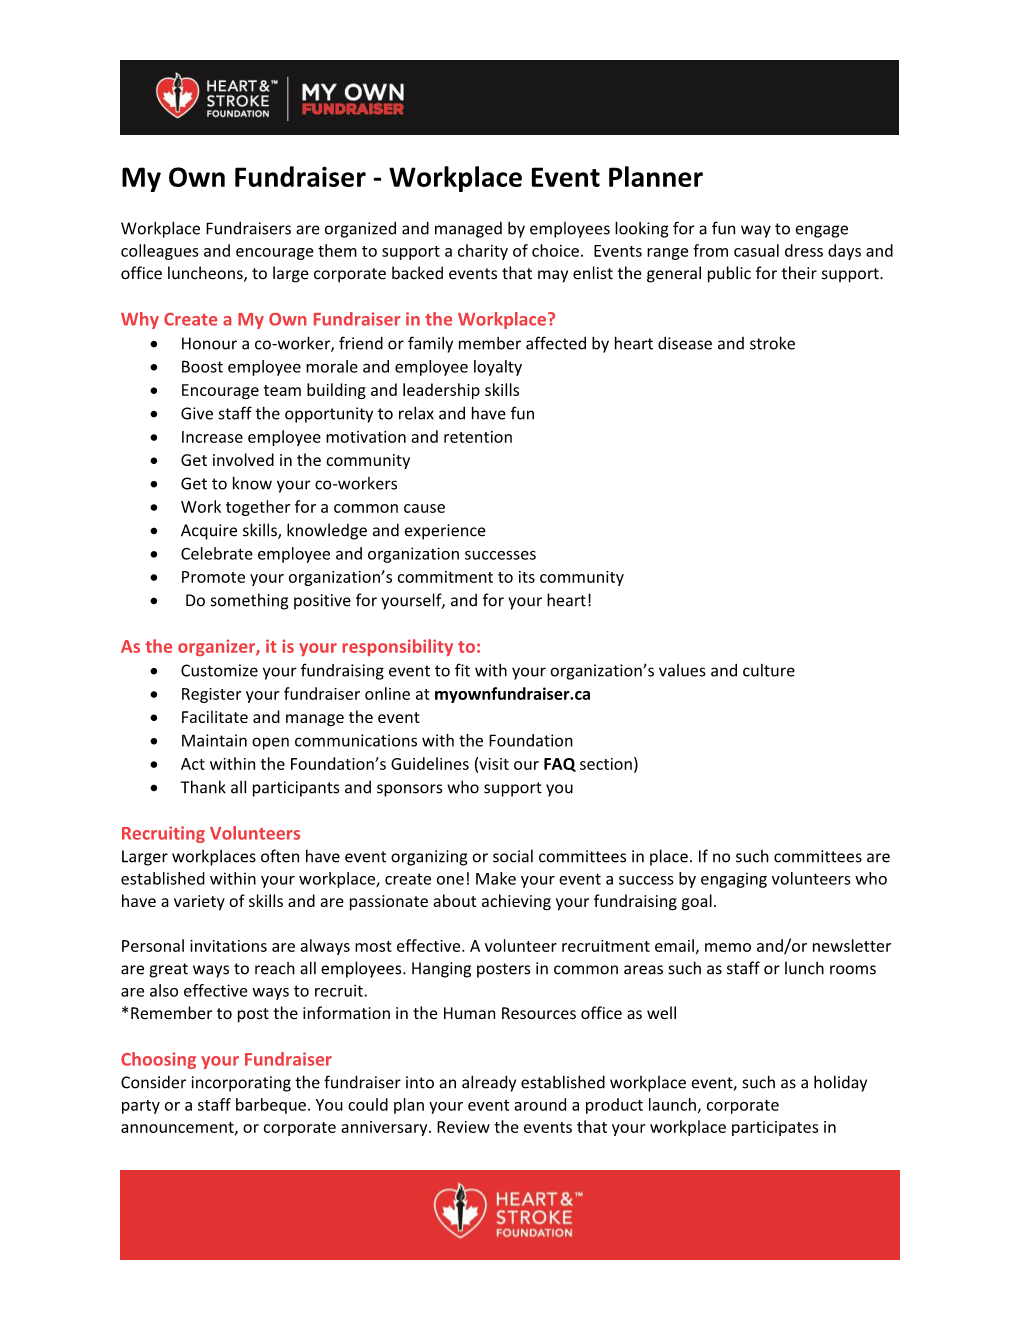 My Own Fundraiser - Workplace Event Planner